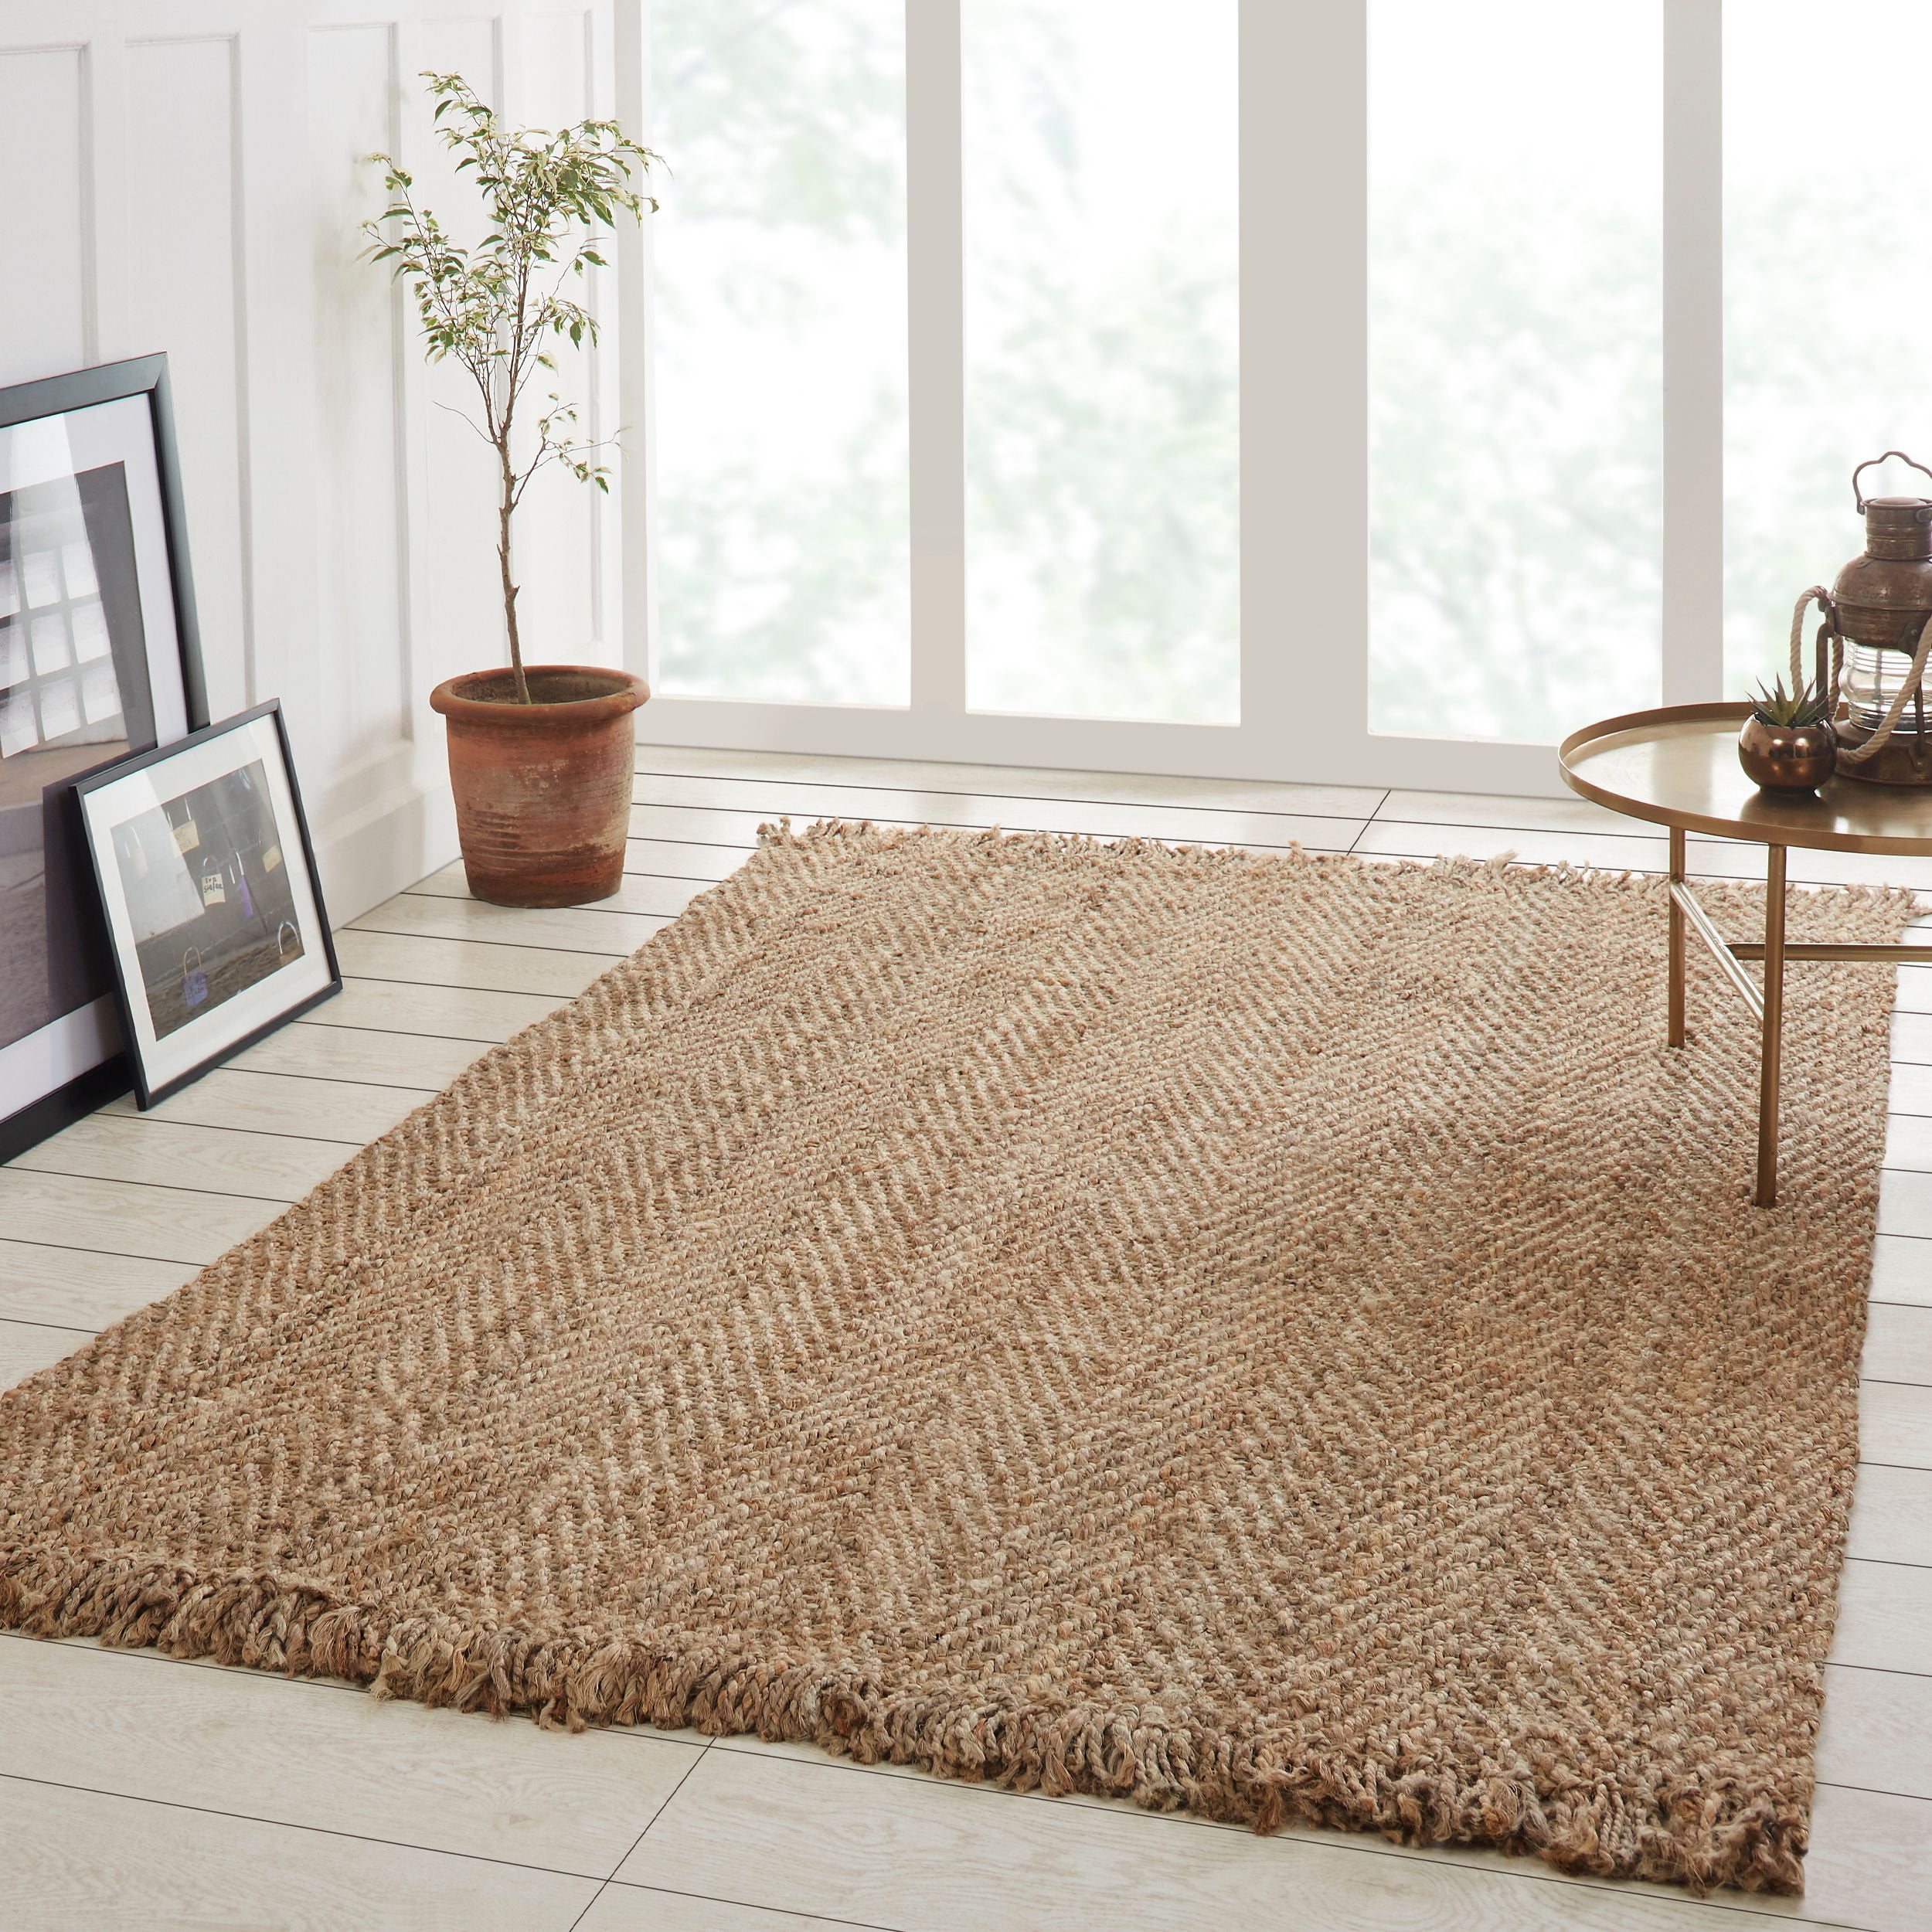 Natural Area Rugs Chatsworth Hand Woven Jute Area Throw Rug Carpet